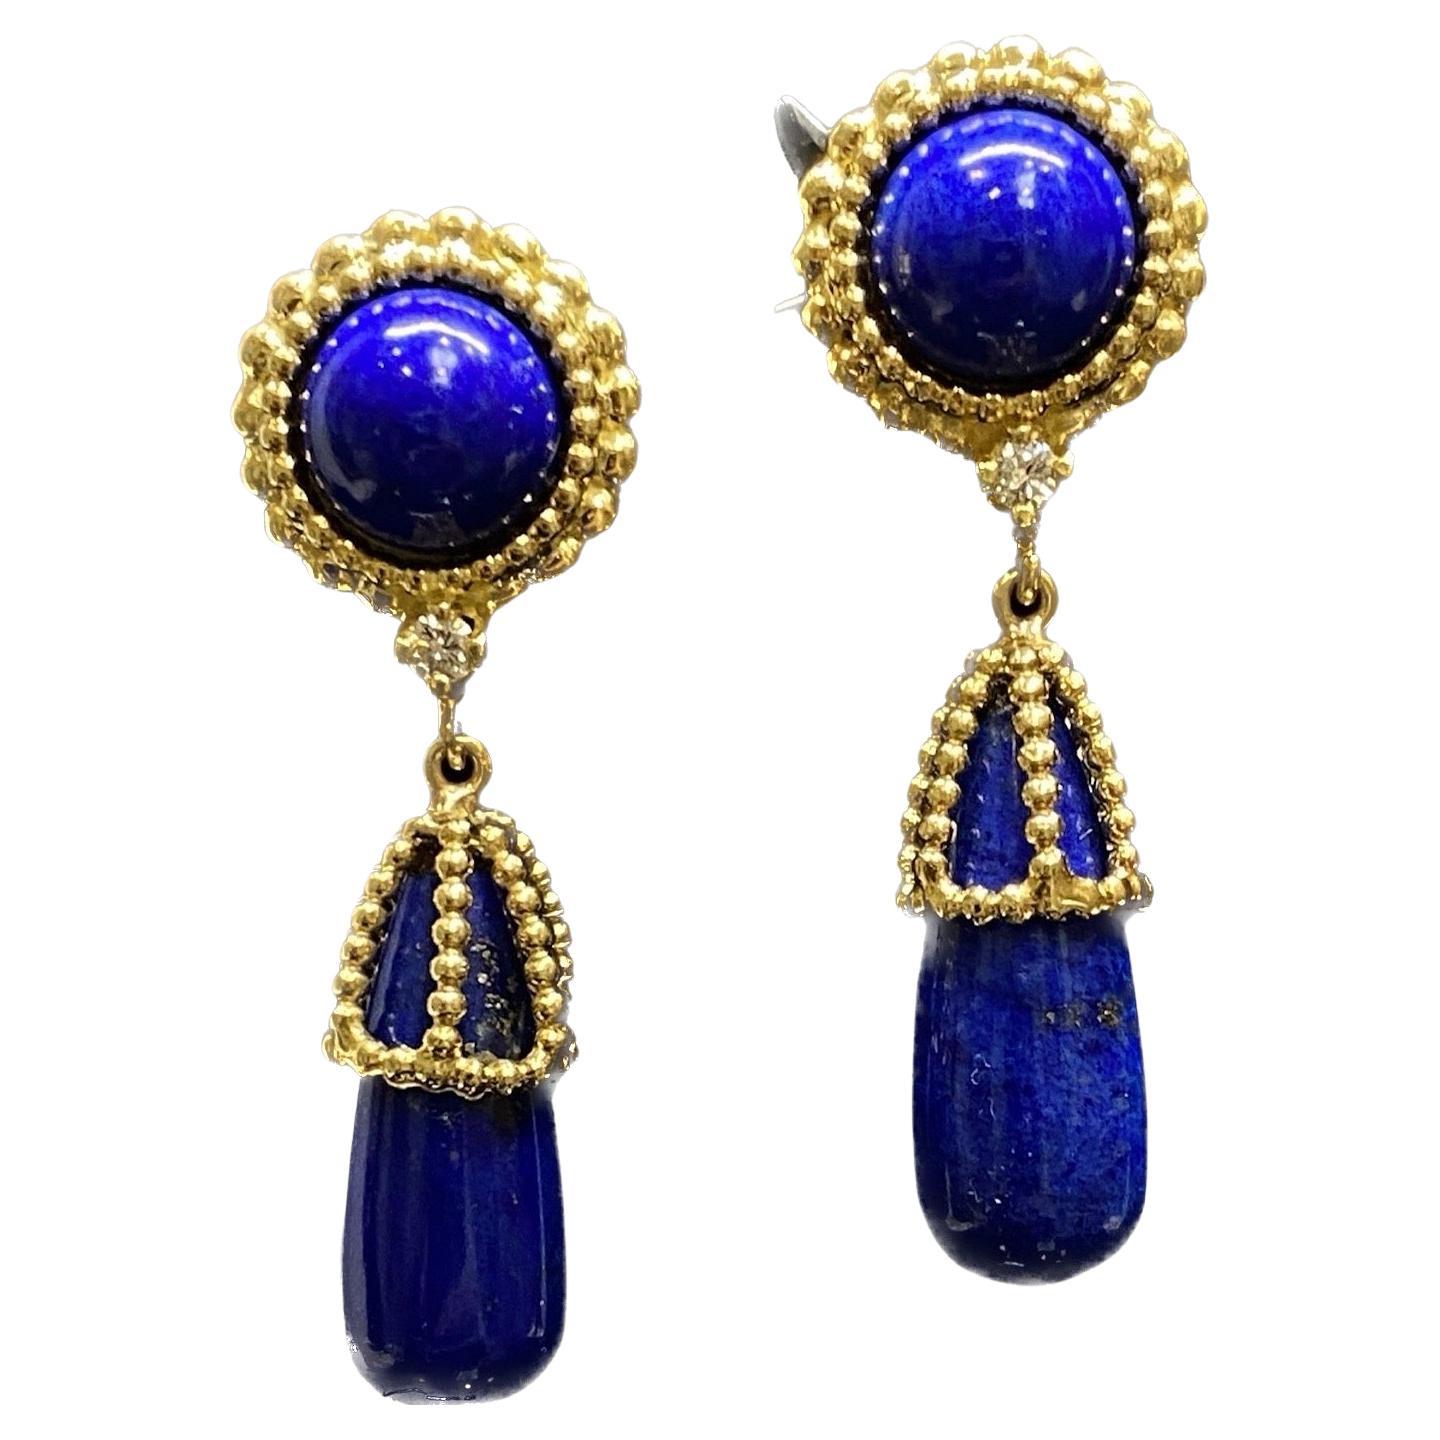 Simply Beautiful Vintage Mid Century Designer Earrings from the Italian house Cellino. Vibrant and natural undyed blue lapis lazuli drops set in beaded cage tops suspend from round cabochons framed in beaded gold and accented with a sparkling